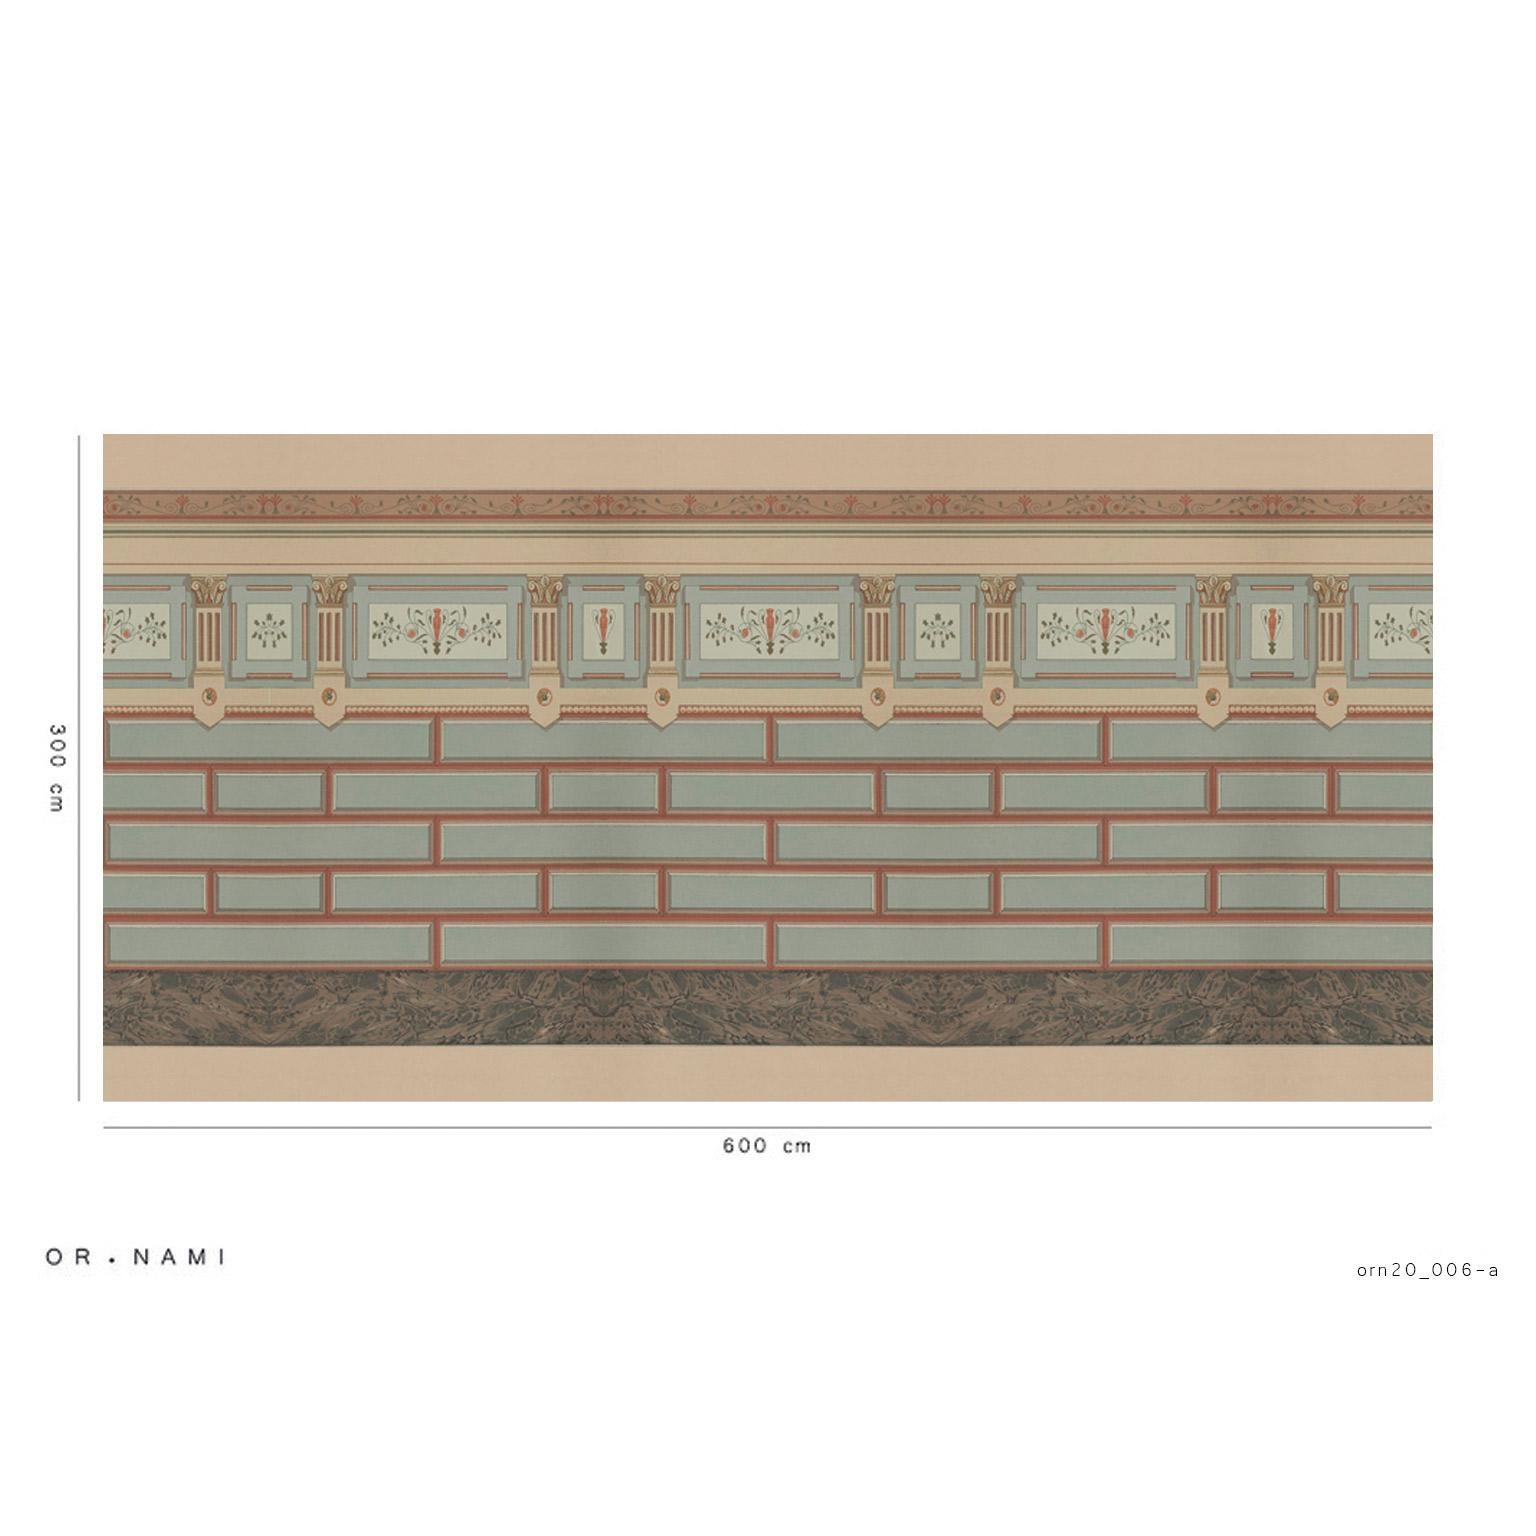 ORN20_006 It is an homage to the early Pompeian style of frescoes present in many of the temples and residences in Pompeii and Herculaneum, which have survived to the present day in all their sumptuous beauty. Large geometric bands which imitate the